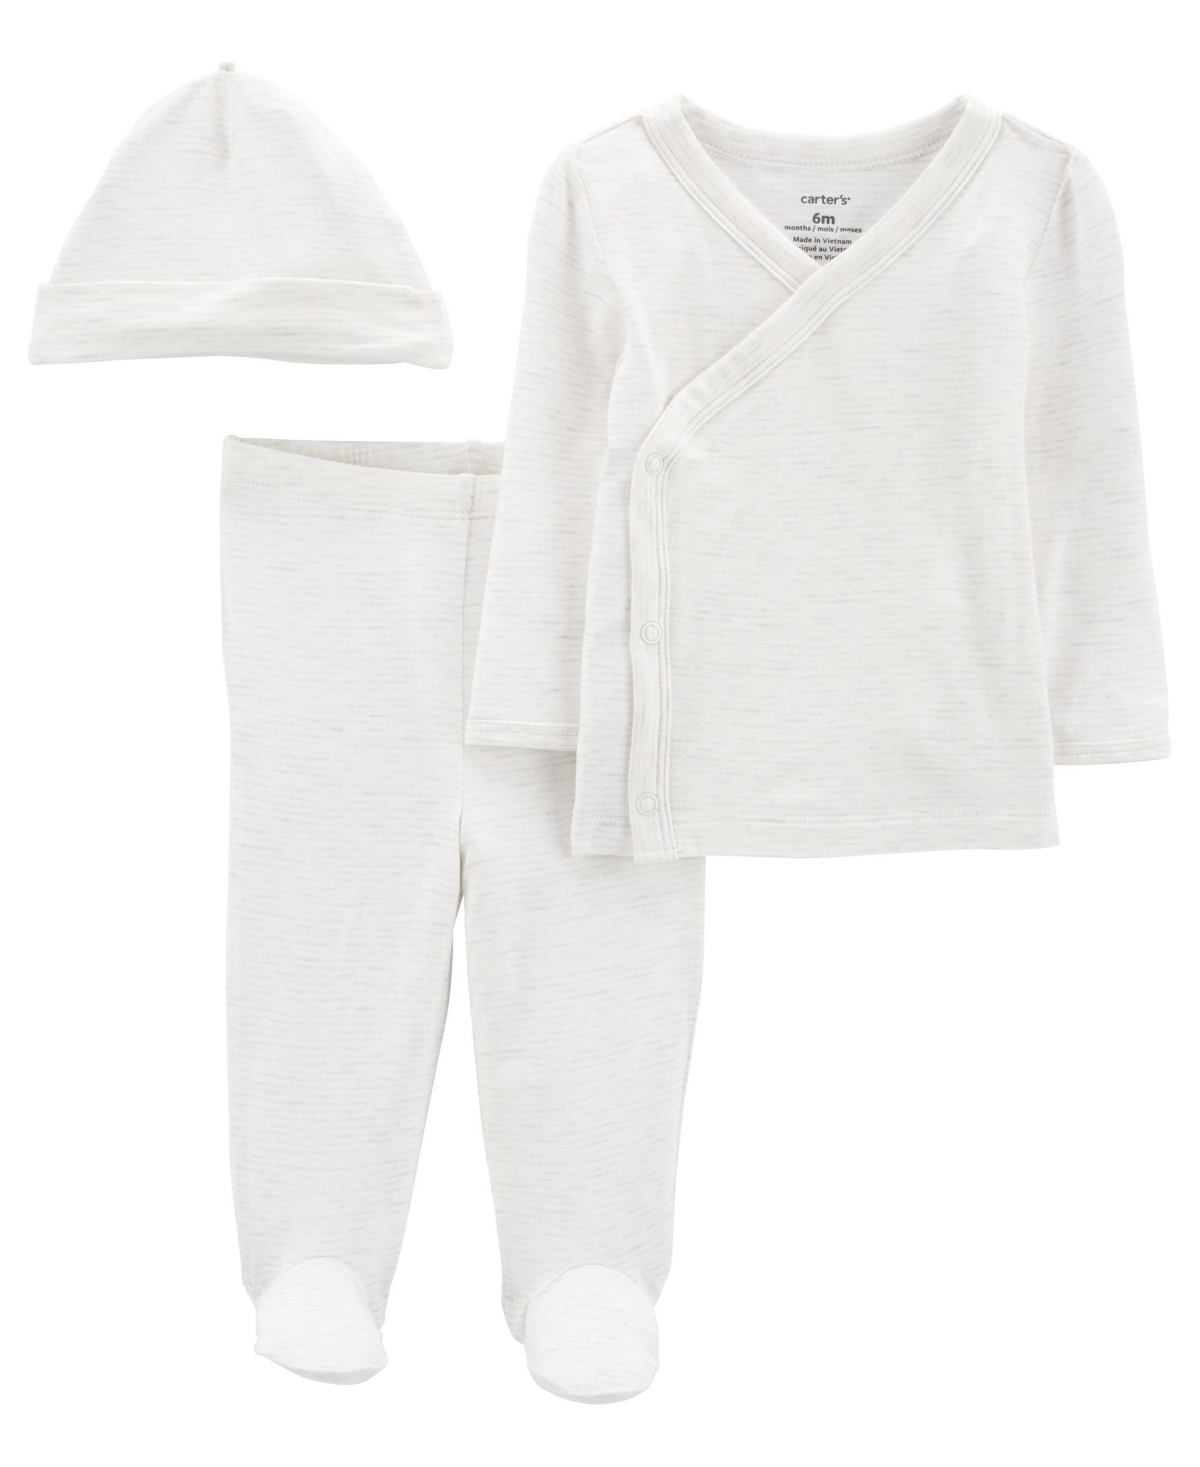 Carter's Baby Boys Or Baby Girls Purelysoft Side Snap Bodysuit, Pants And Cap, 3 Piece Set In White